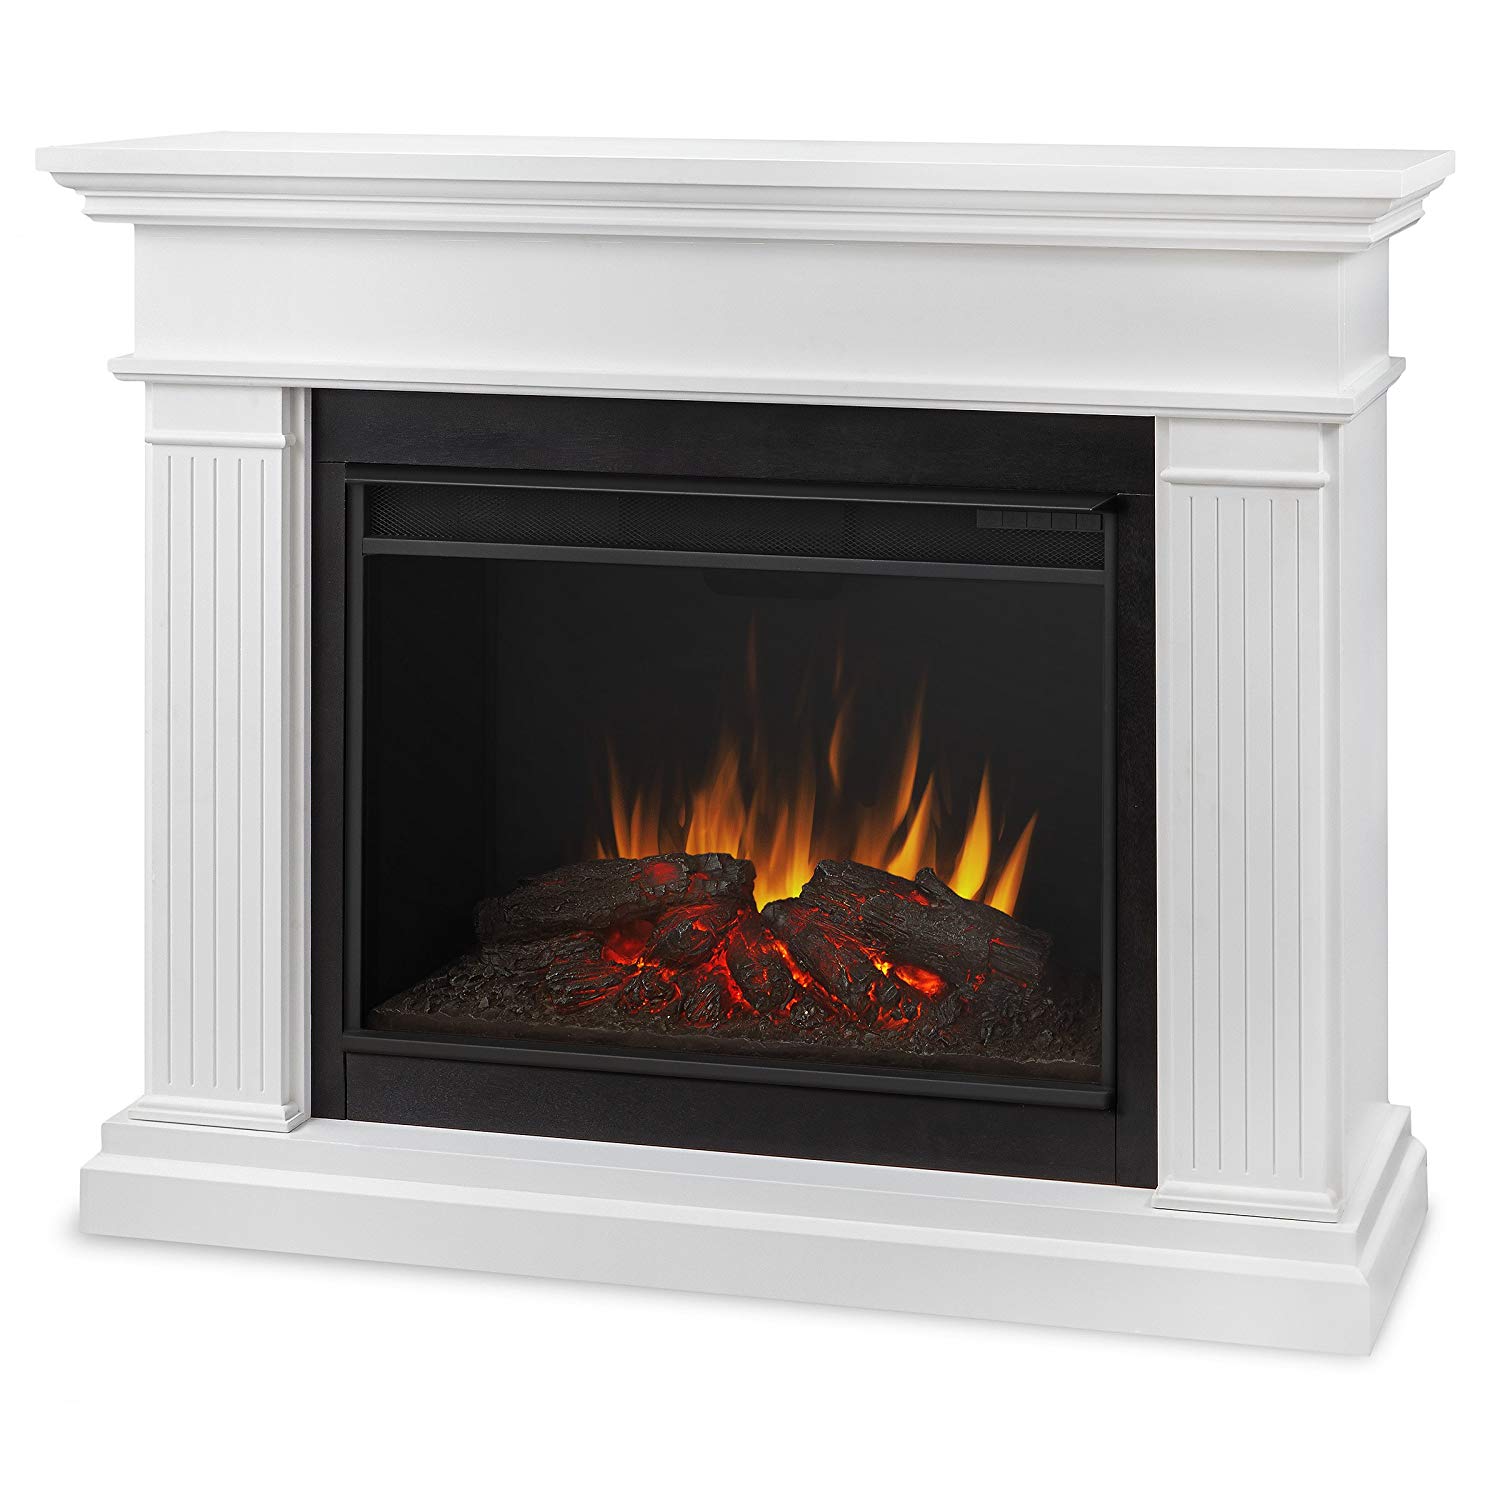 Spitfire Fireplace Heater New White Fireplace Electric Charming Fireplace